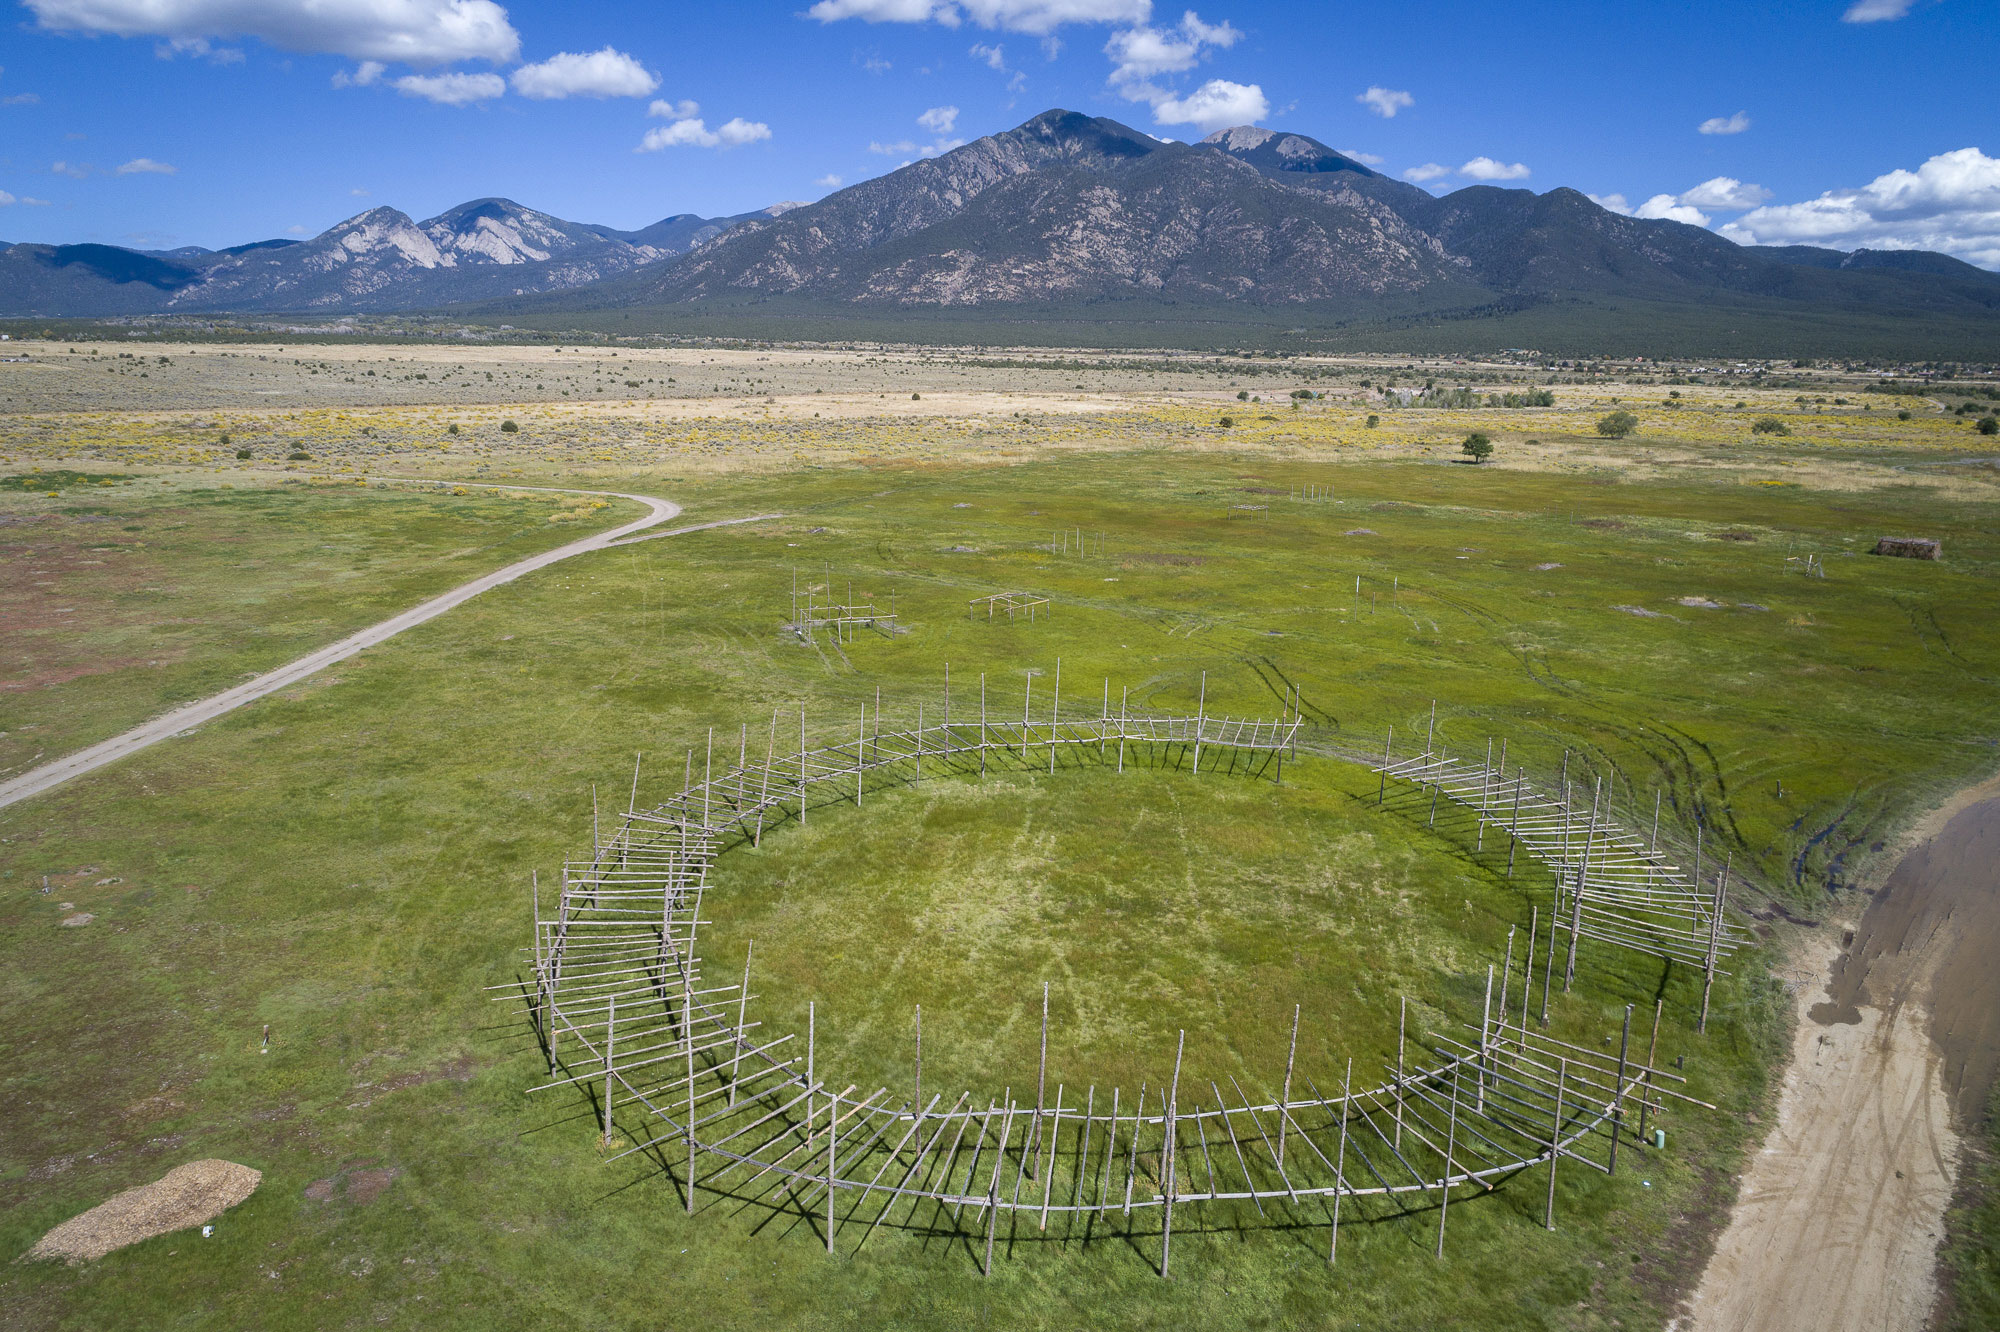 An ariel photograph of a round structure that serves as the Taos Pueblo powwow grounds